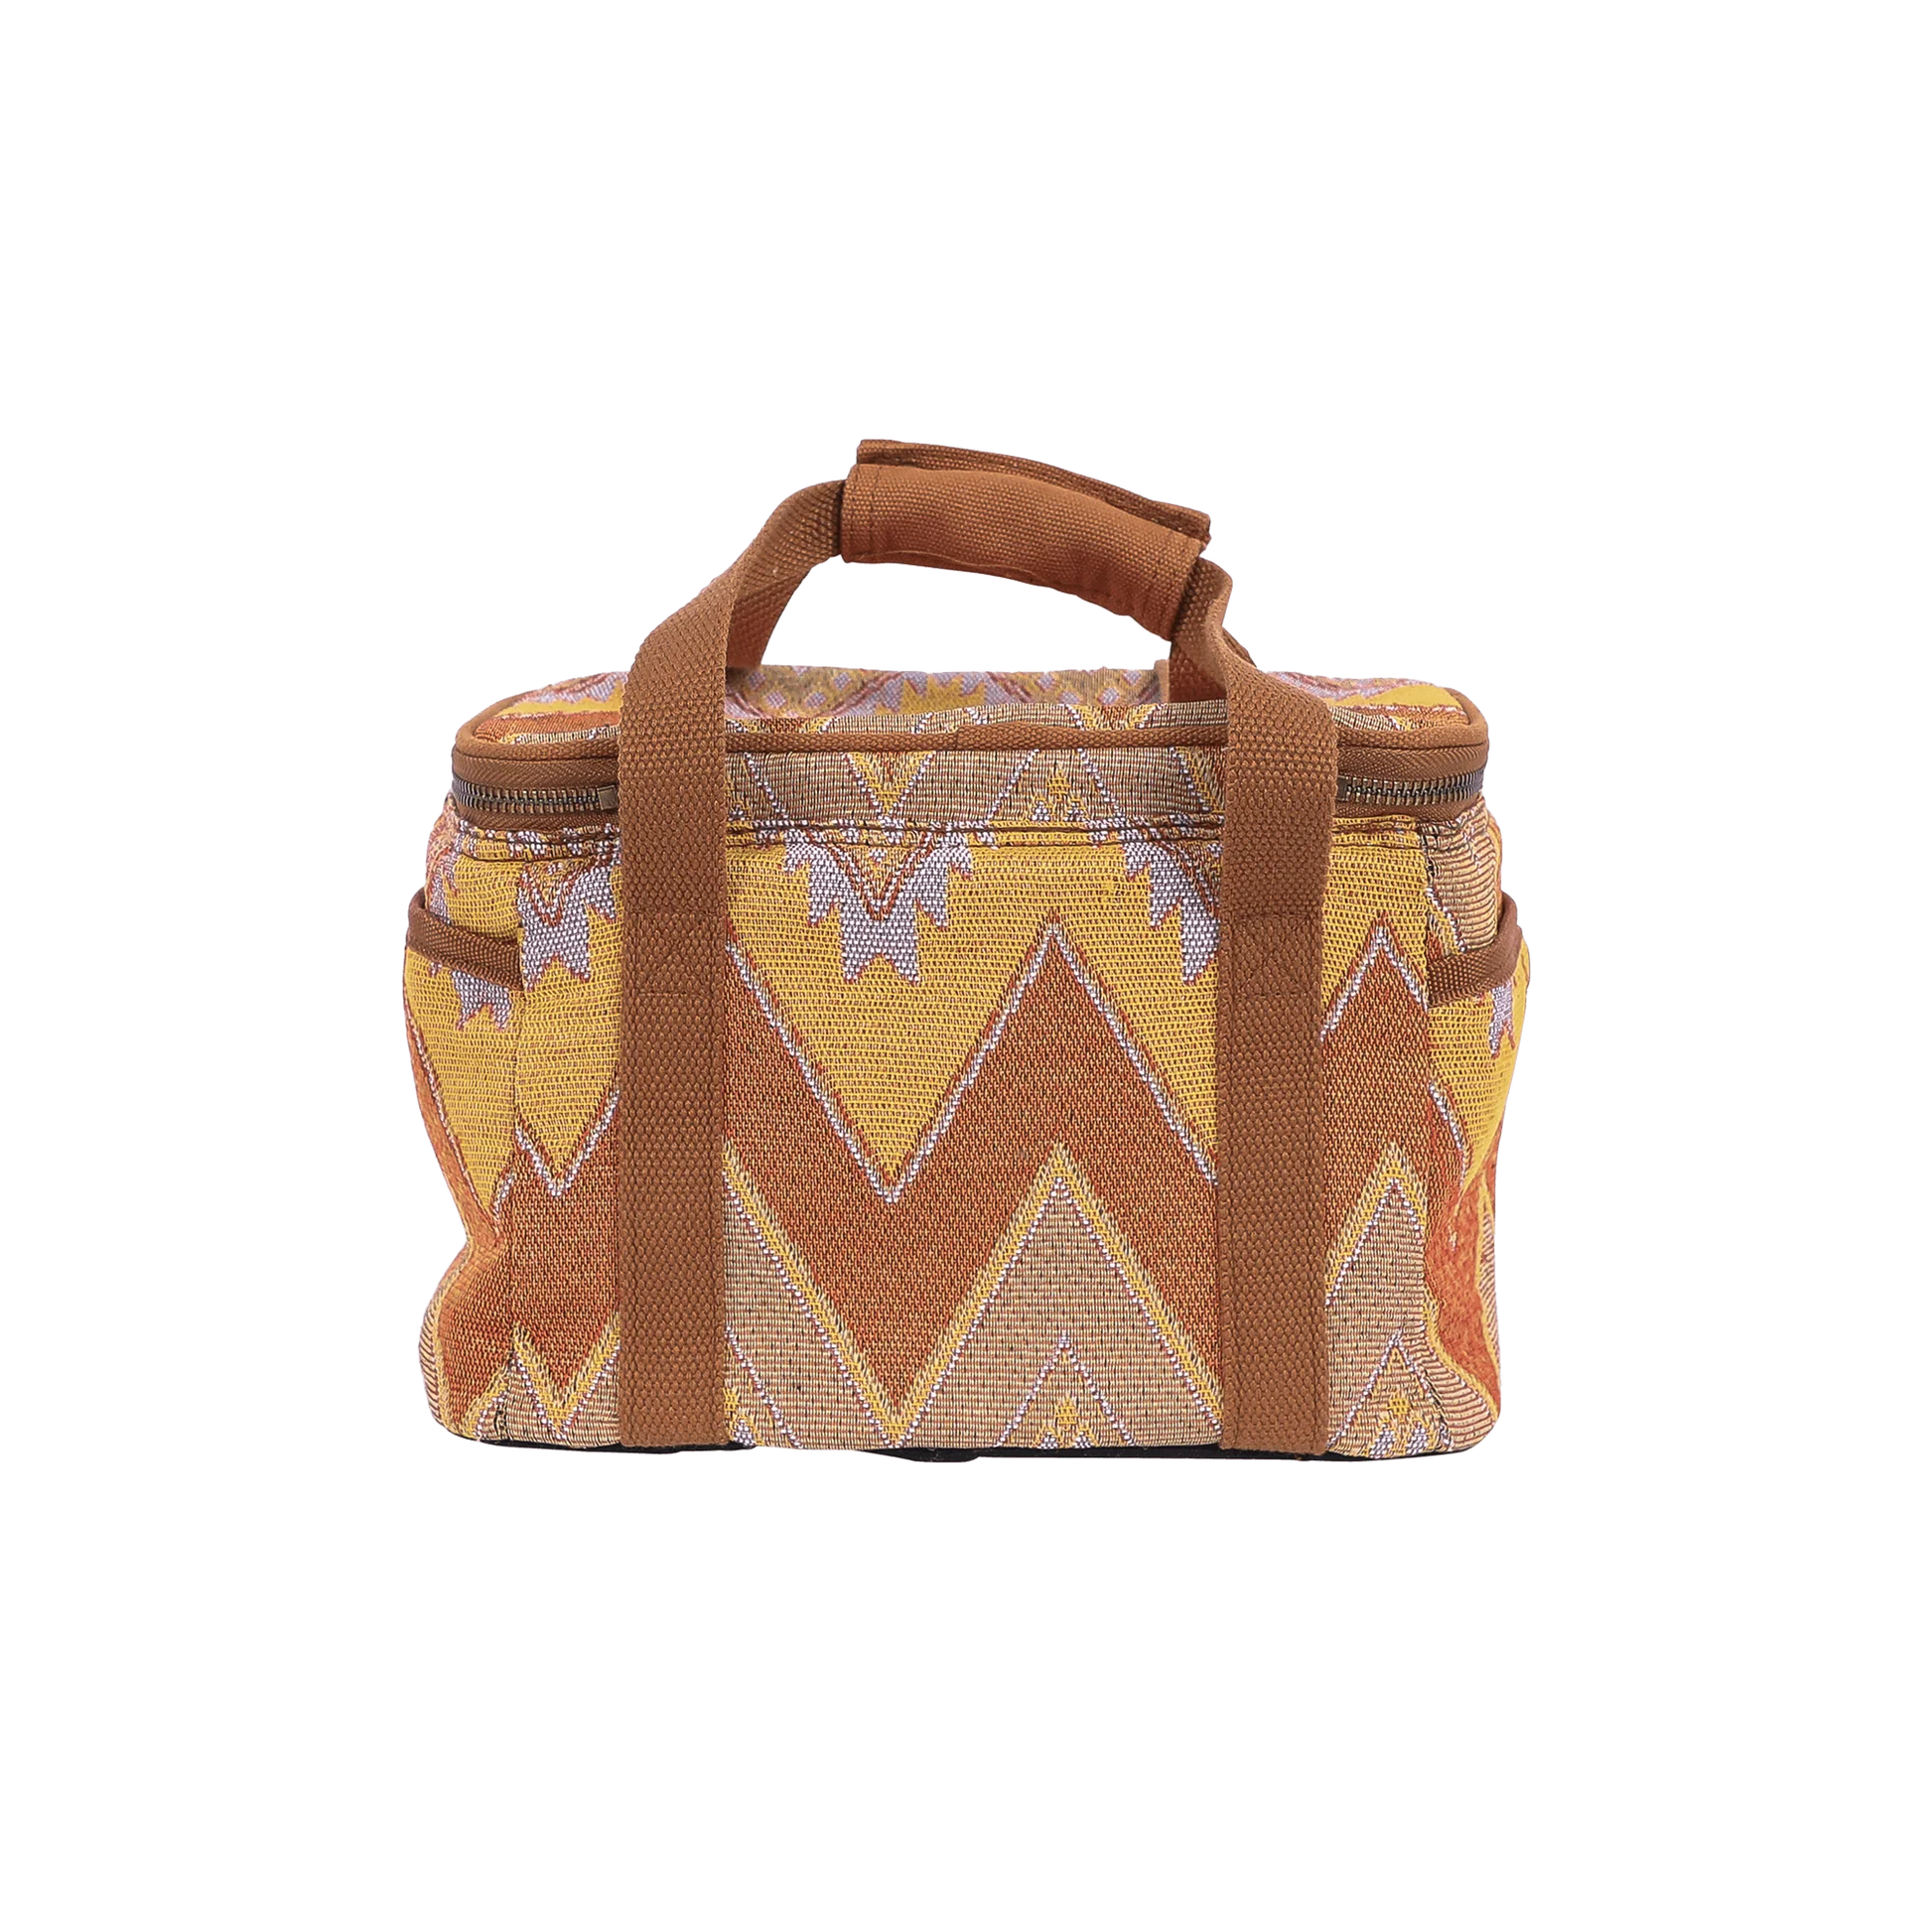 The Jagger Cooler Bag is our newest cooler bag design! These coolers feature the same customer designed woven fabric as our Jagger Throw in Iris.